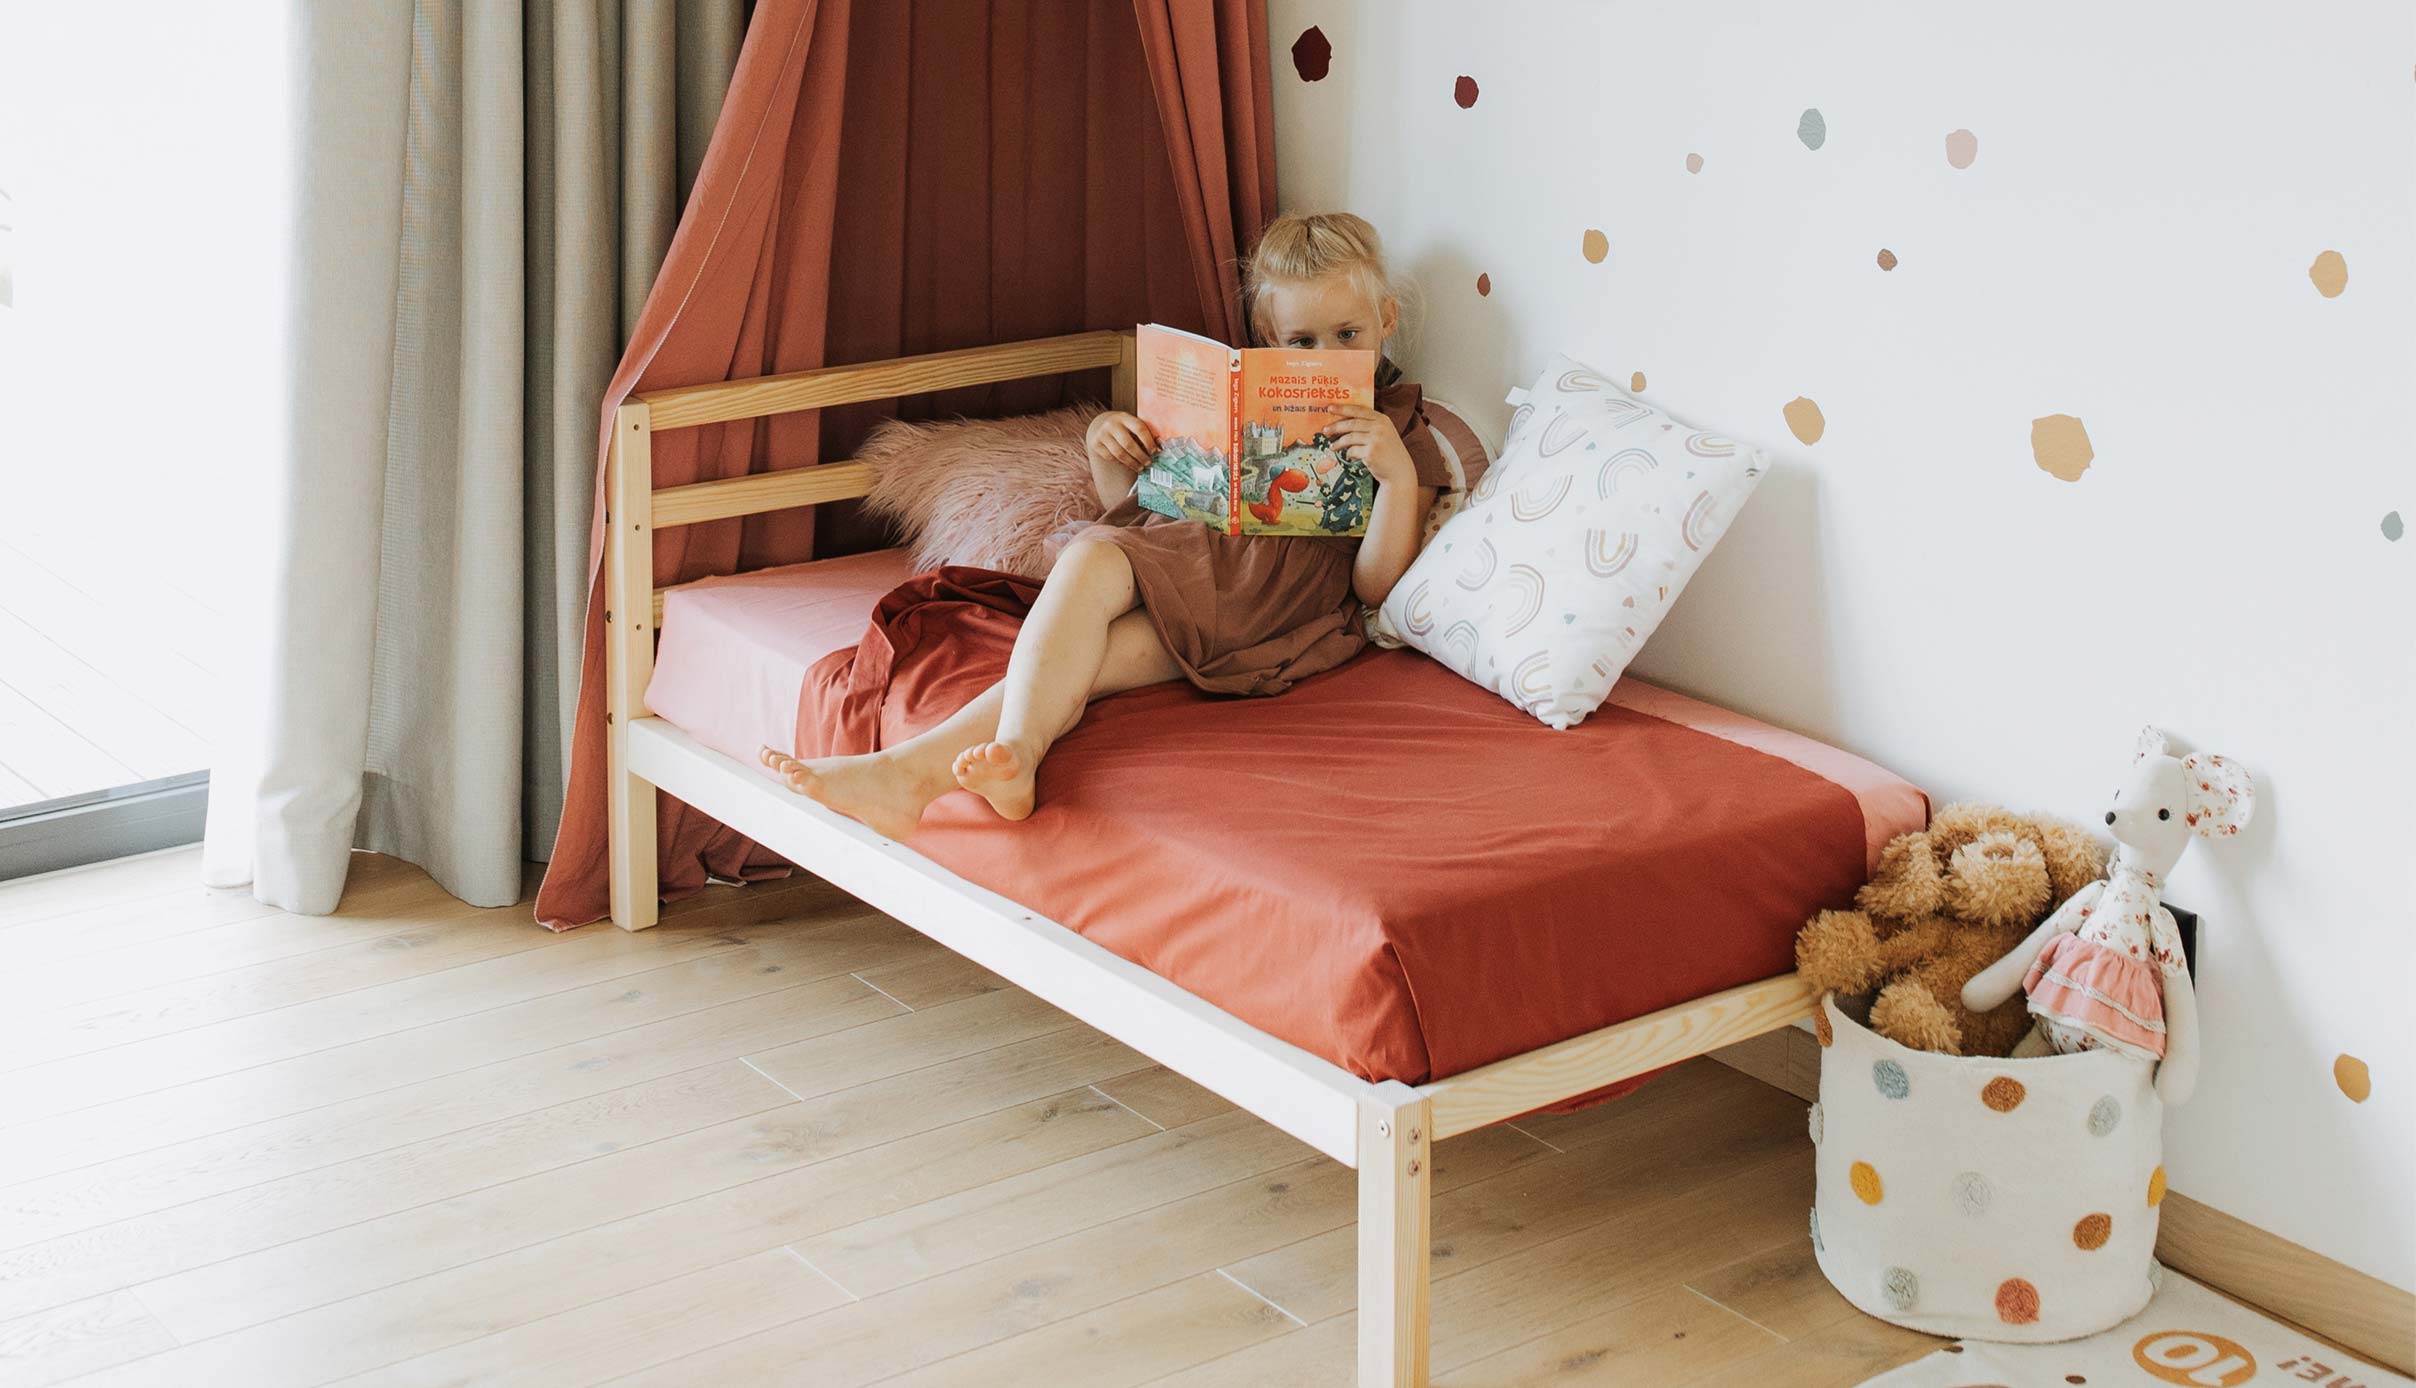 A little girl is reading a book on her bed.